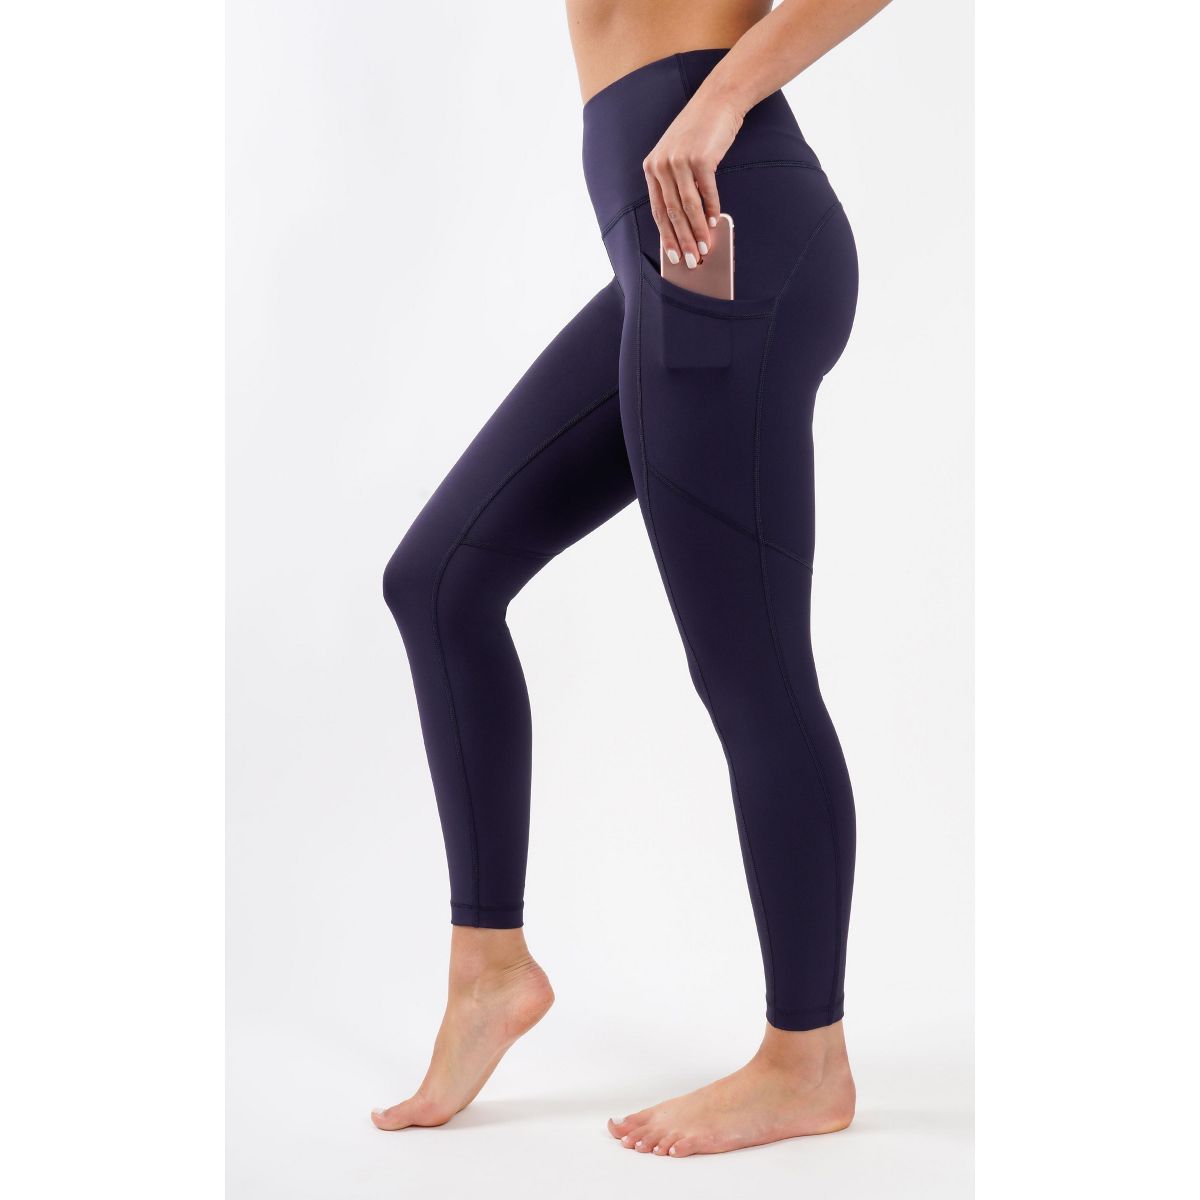 90 Degree by Reflex Womens Interlink High Waist Ankle Legging with Back Curved Yoke | Target